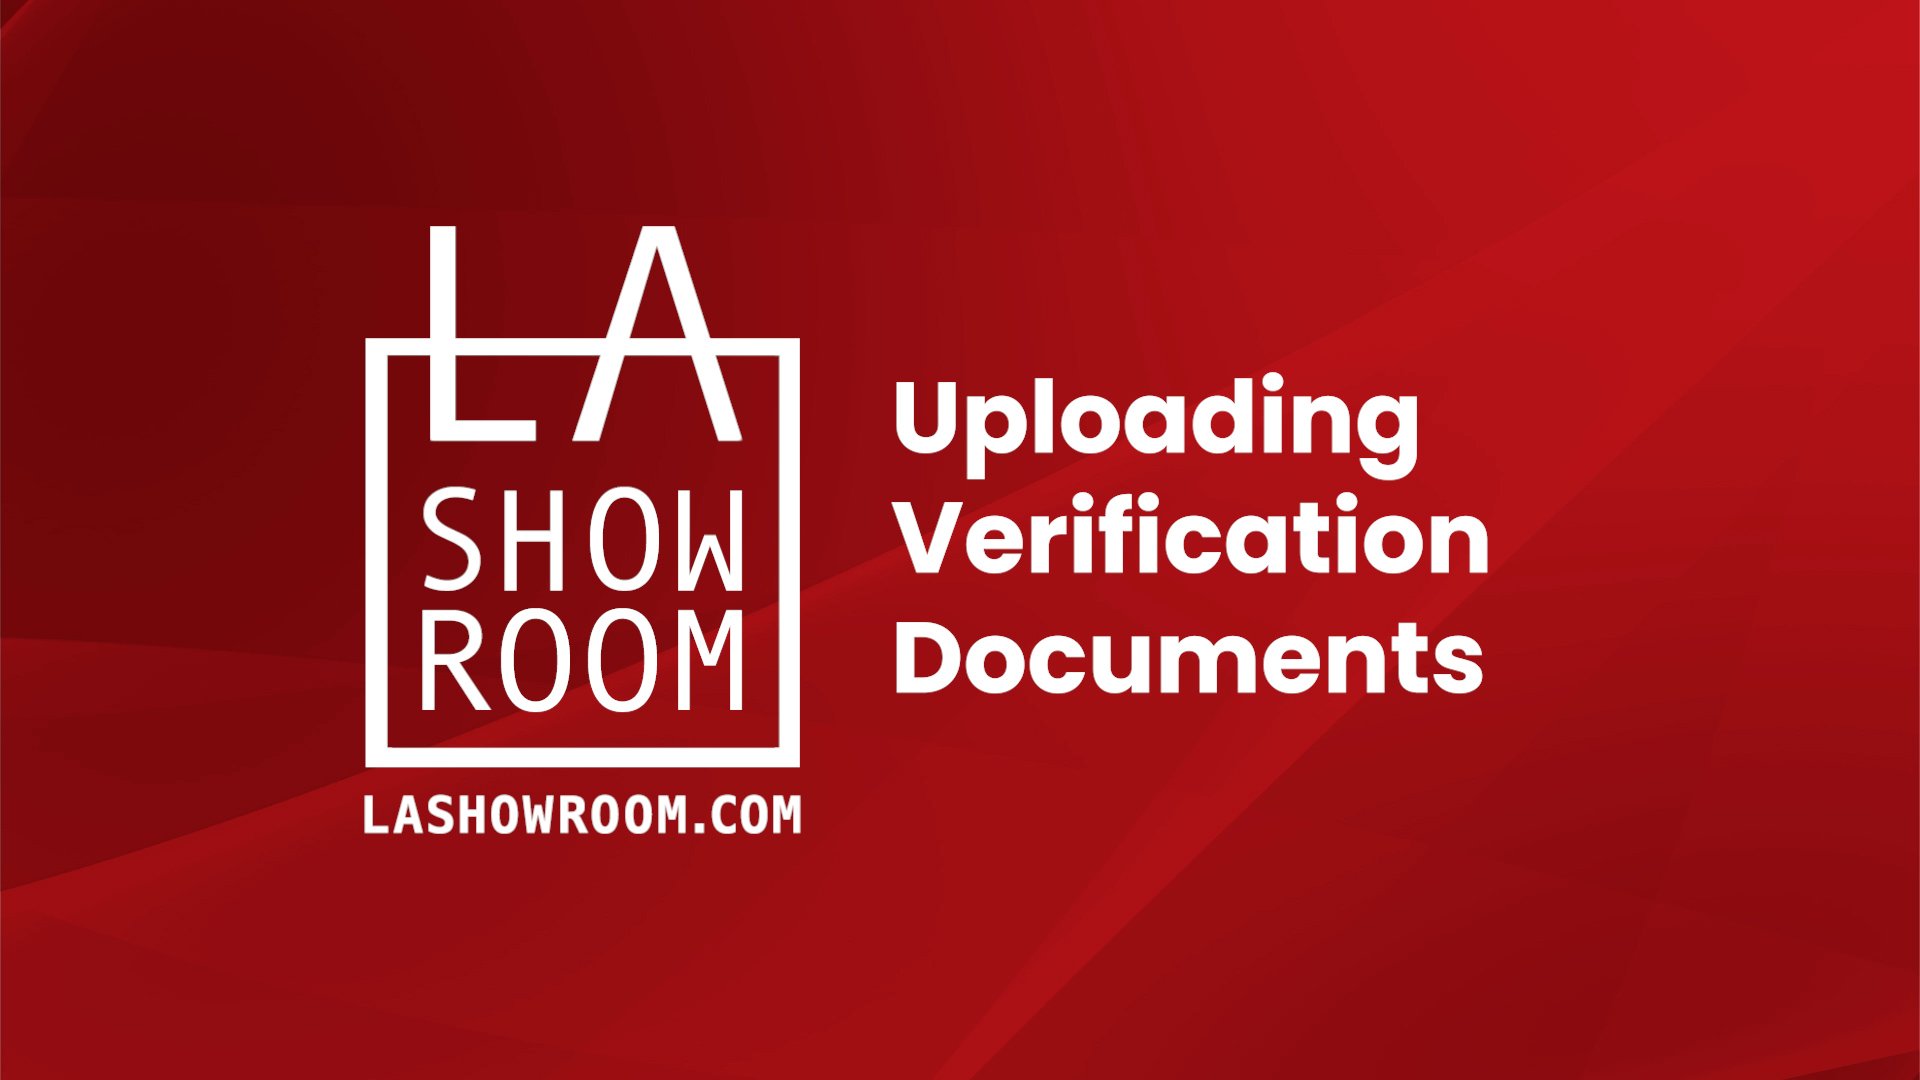 How to upload verification documents to become verified